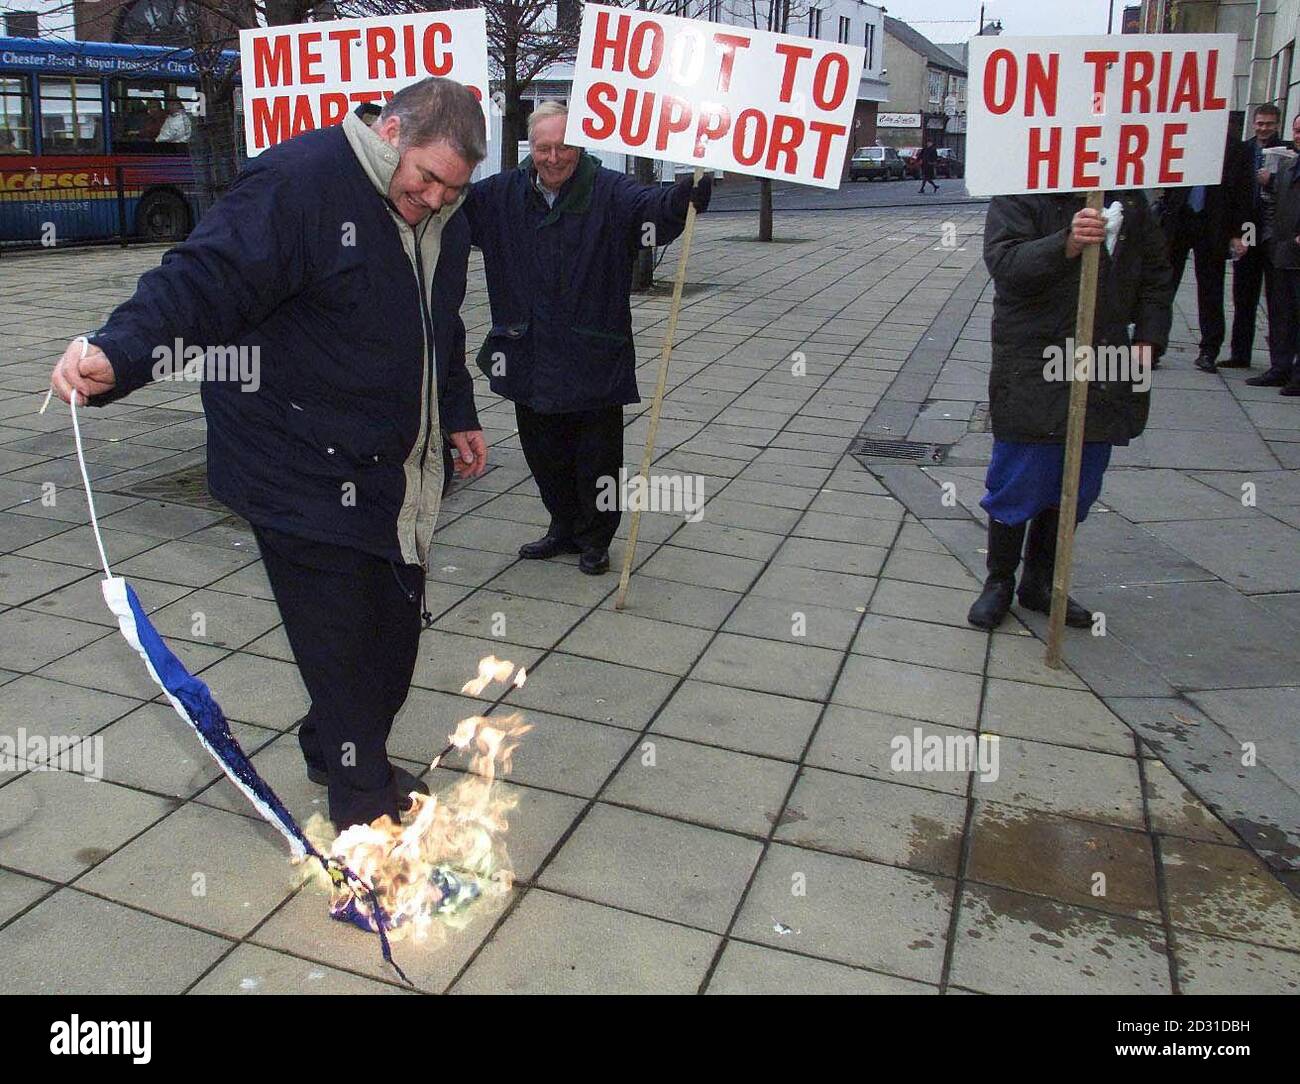 David Stephens, from Southend, shows his support for Steve Thoburn, a Sunderland market trader who is being prosecuted for selling goods in imperial measures rather than metric, by burning the flag of the European Union.  * Mr Stephens set fire to the flag outside Sunderland Magistrates Court, where Mr Thoburn is being prosecuted by Sunderland City Council. Stock Photo